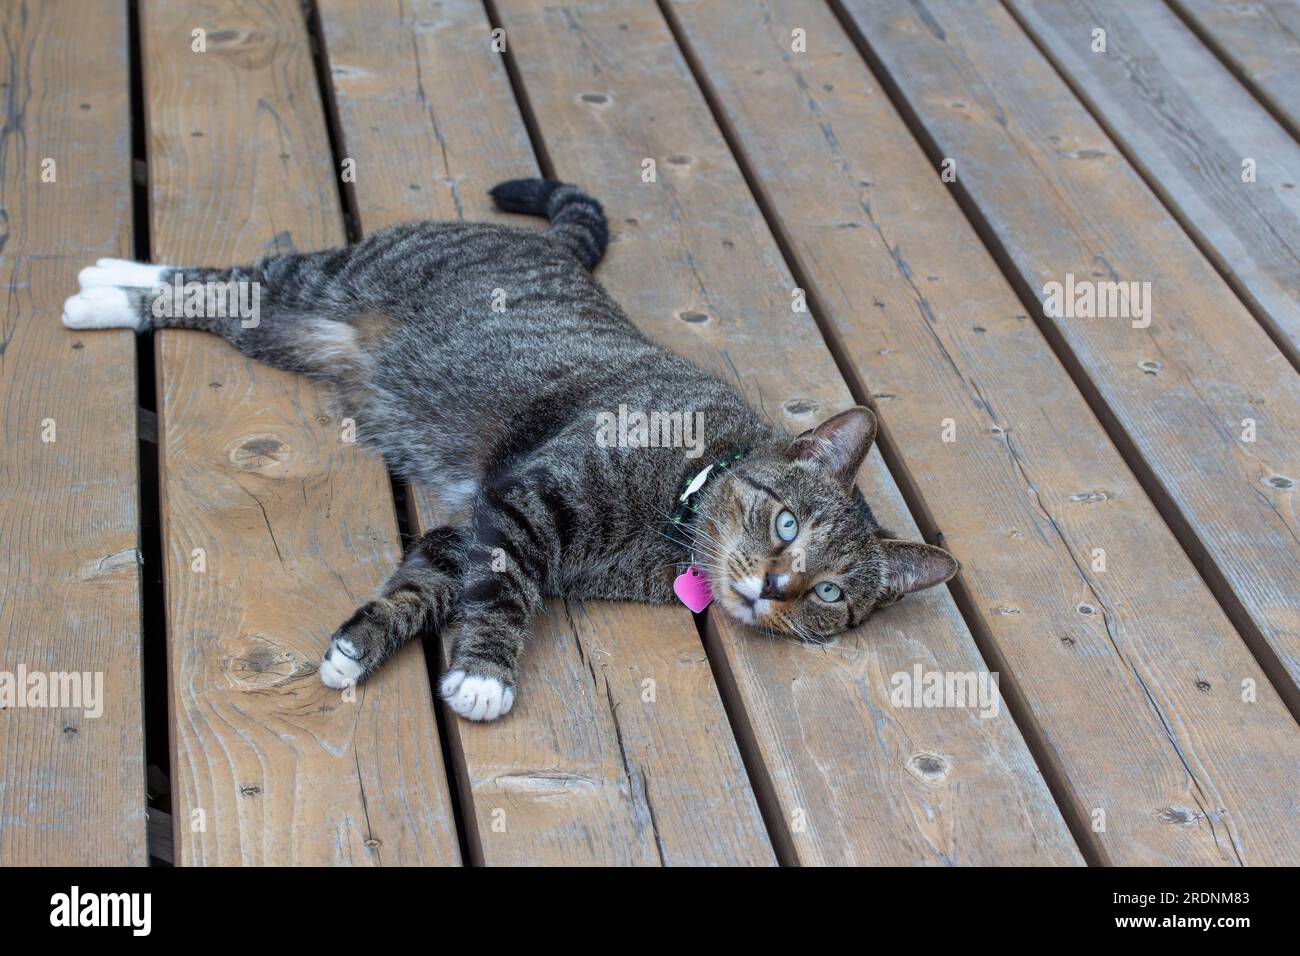 Close up view of a cute gray striped tabby cat with white paws relaxing on a rustic cedar deck Stock Photo